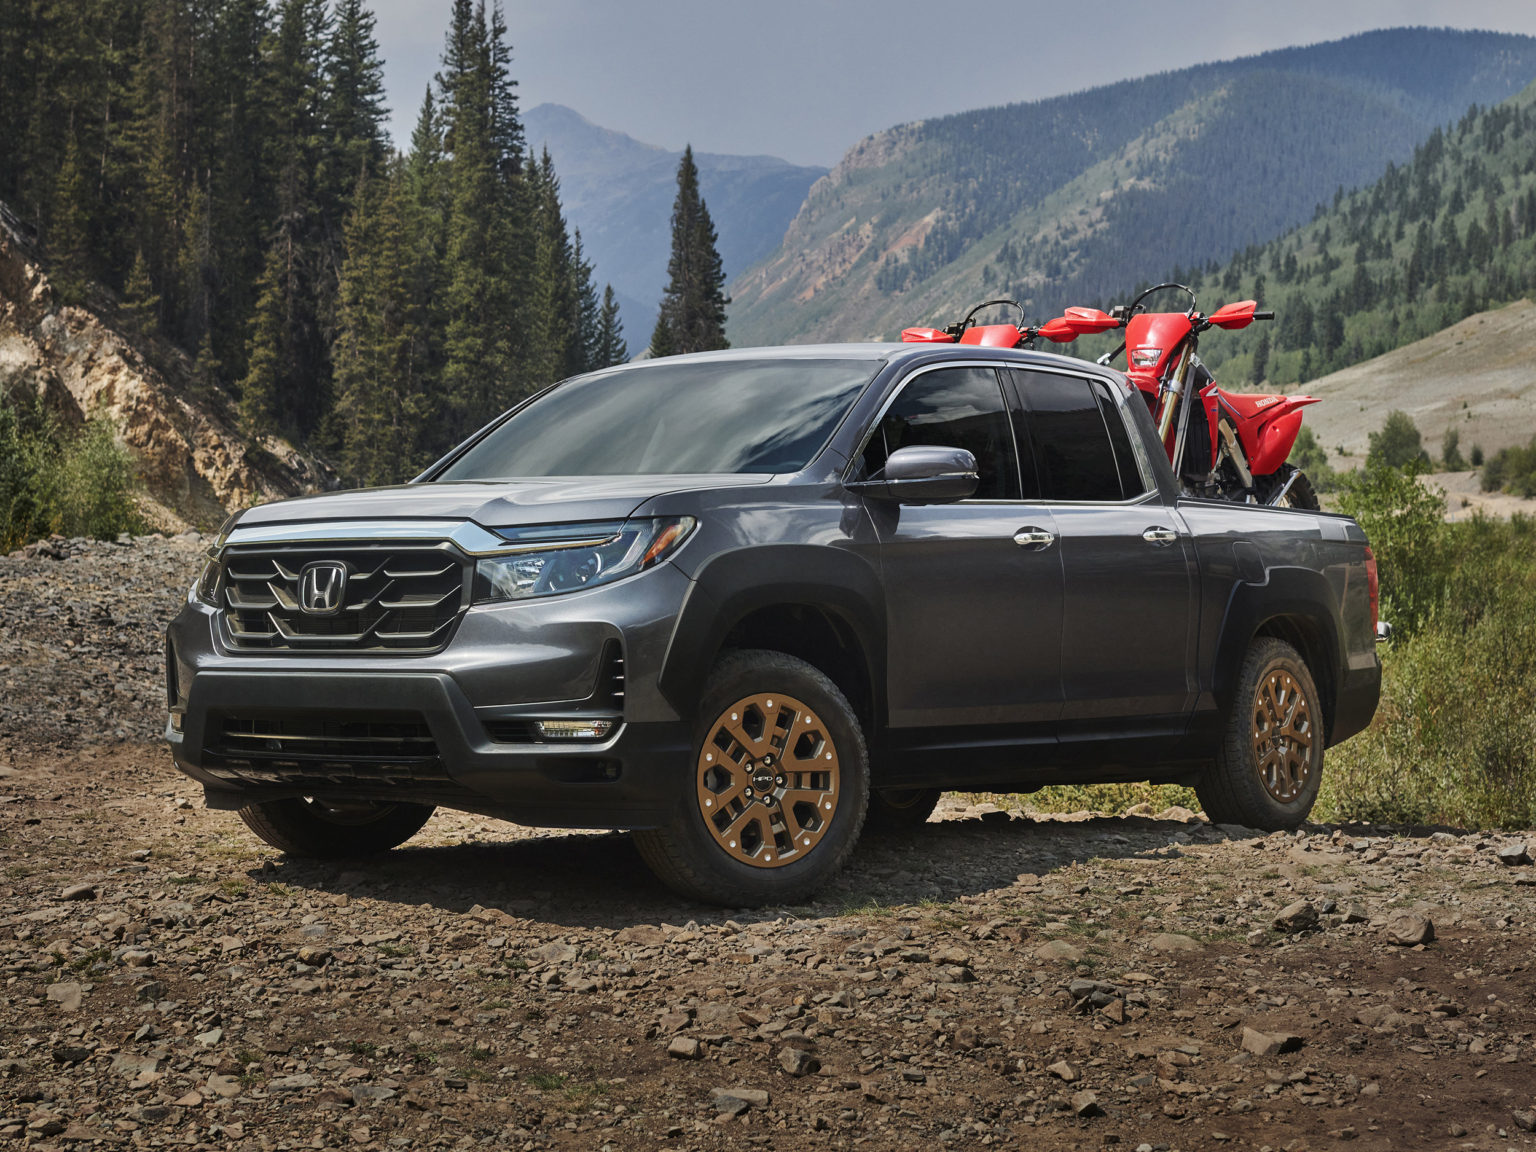 For 2021, the Honda Ridgeline gets meaner looking but keeps the equipment that makes it well-mannered.